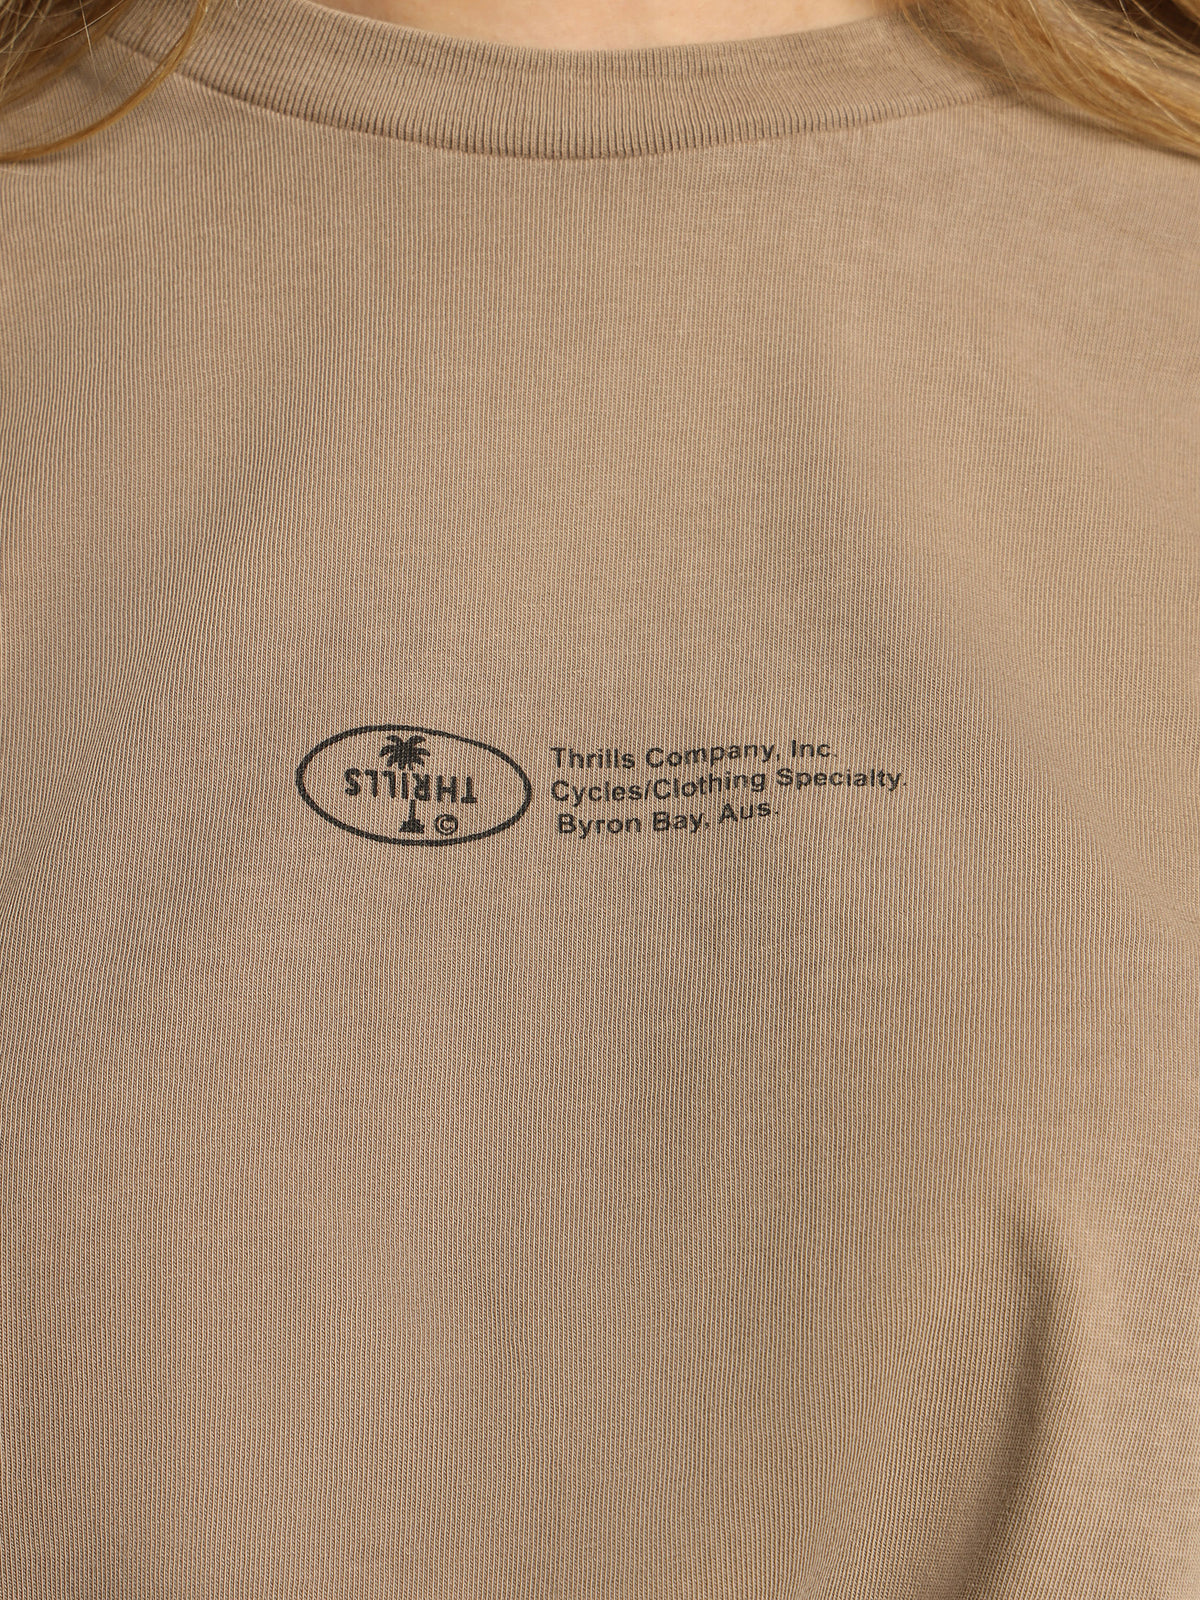 Company Alignment Merch Fit T-Shirt in Aged Tan